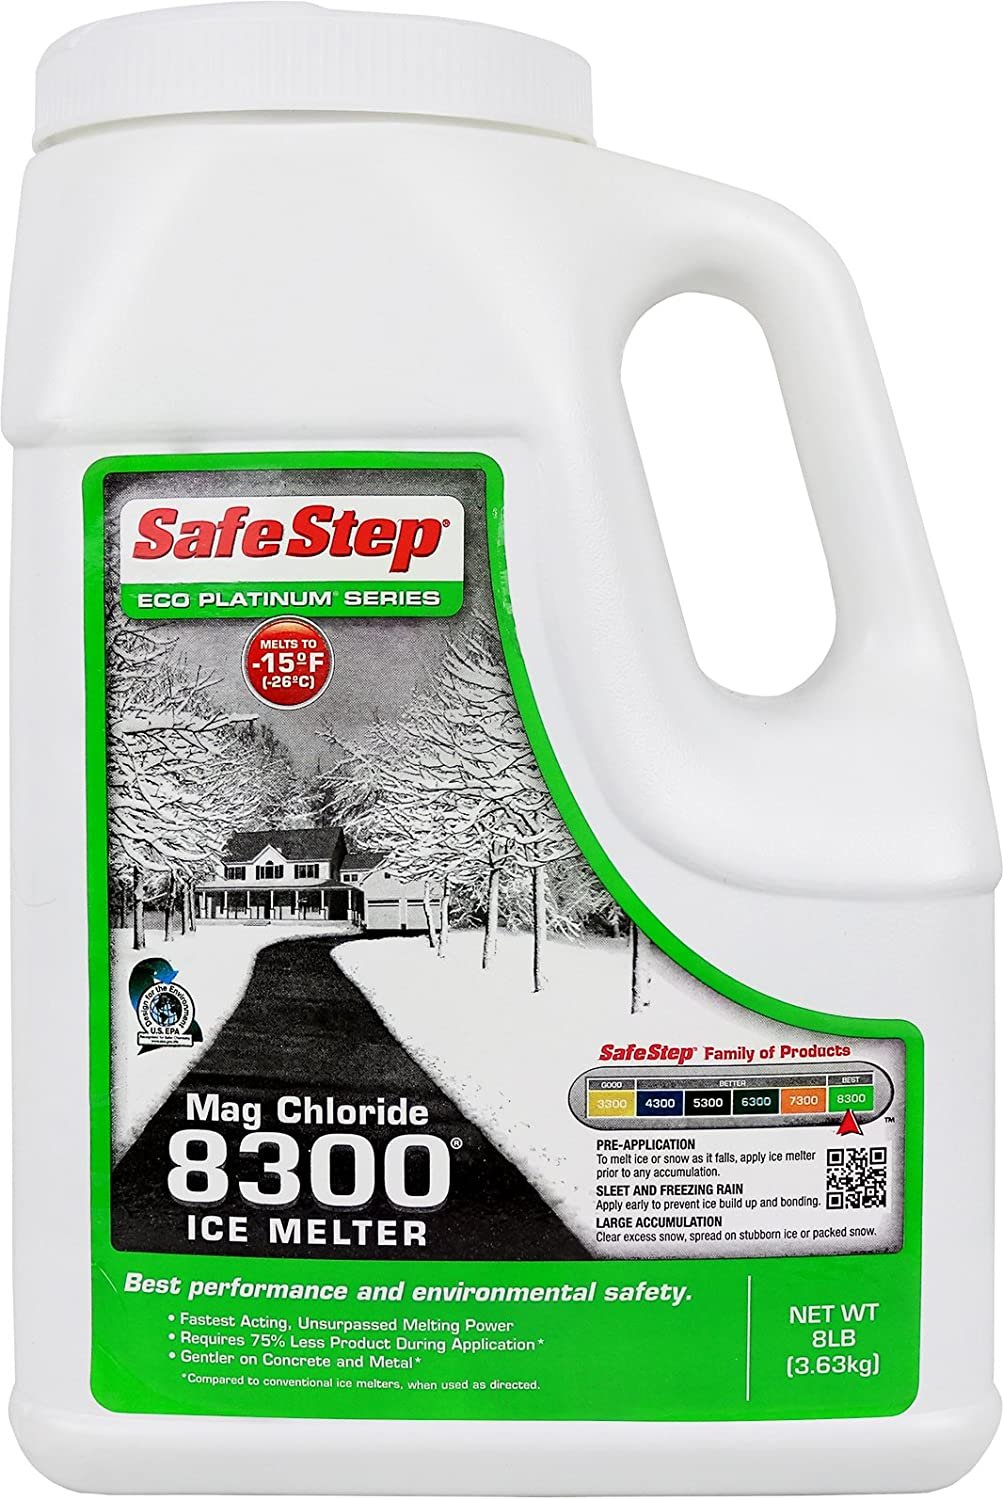 Safe Step Mag Chloride Ice Melter 8300 Maximum Strength Melting Power, Environmentally Safe, Non-Corrosive Safe for Concrete Sidewalks, Driveway Pavement